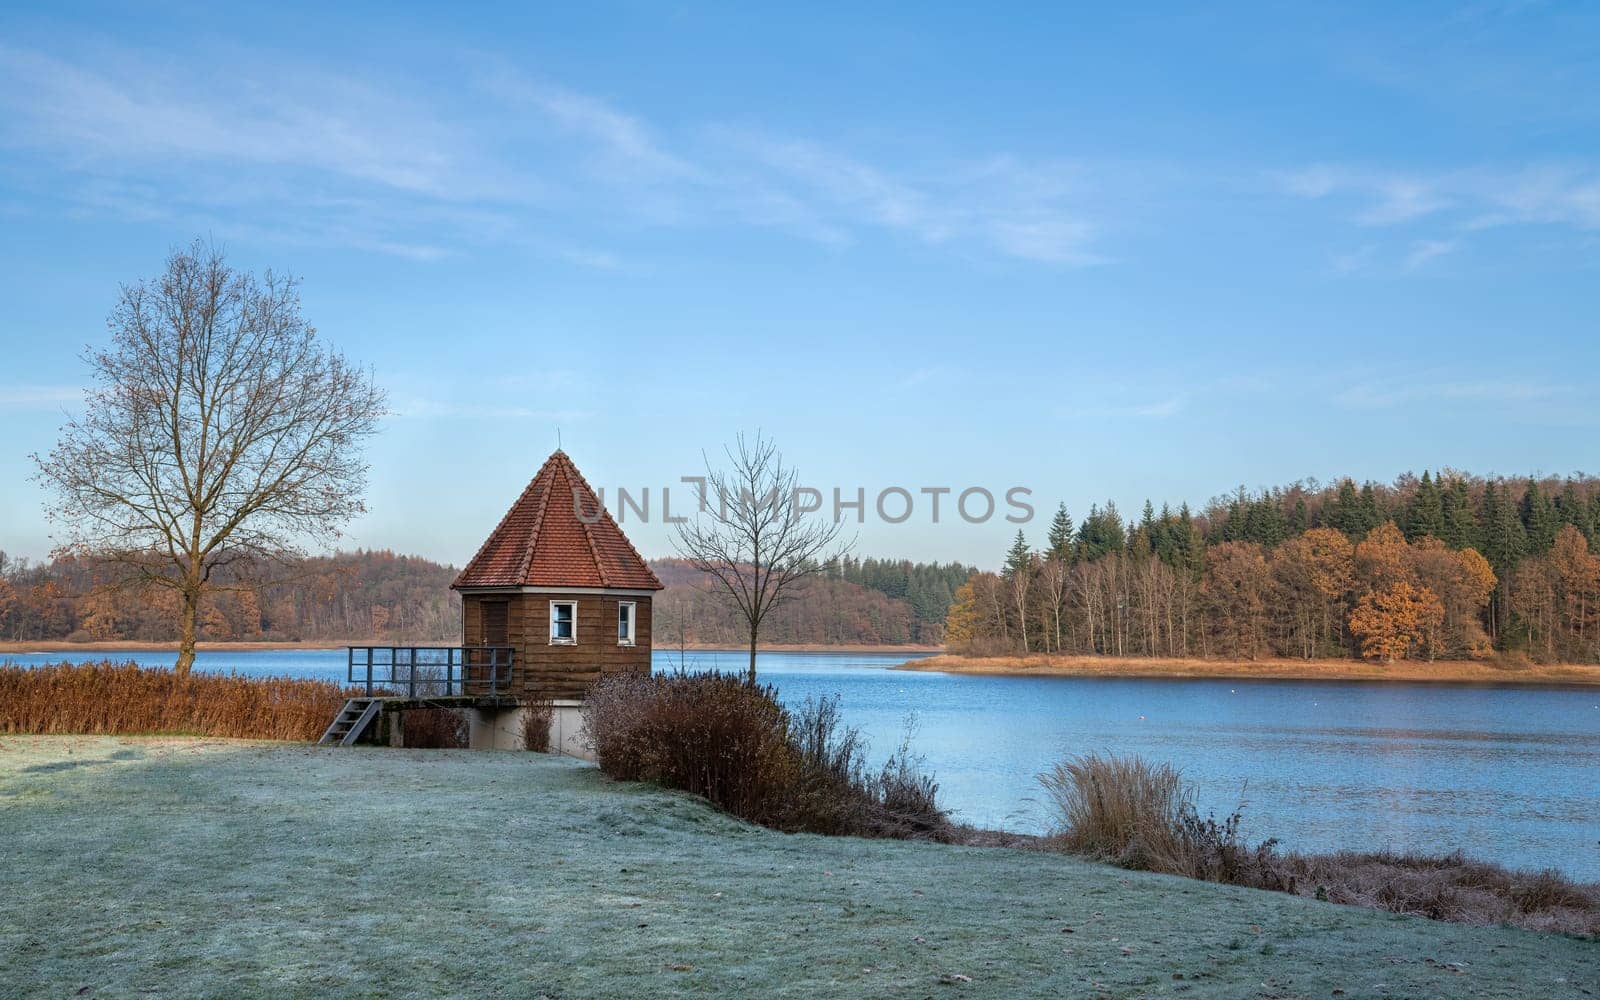 Panoramic image of Kerspe lake close to Marienheide during winter, Bergisches Land, Germany